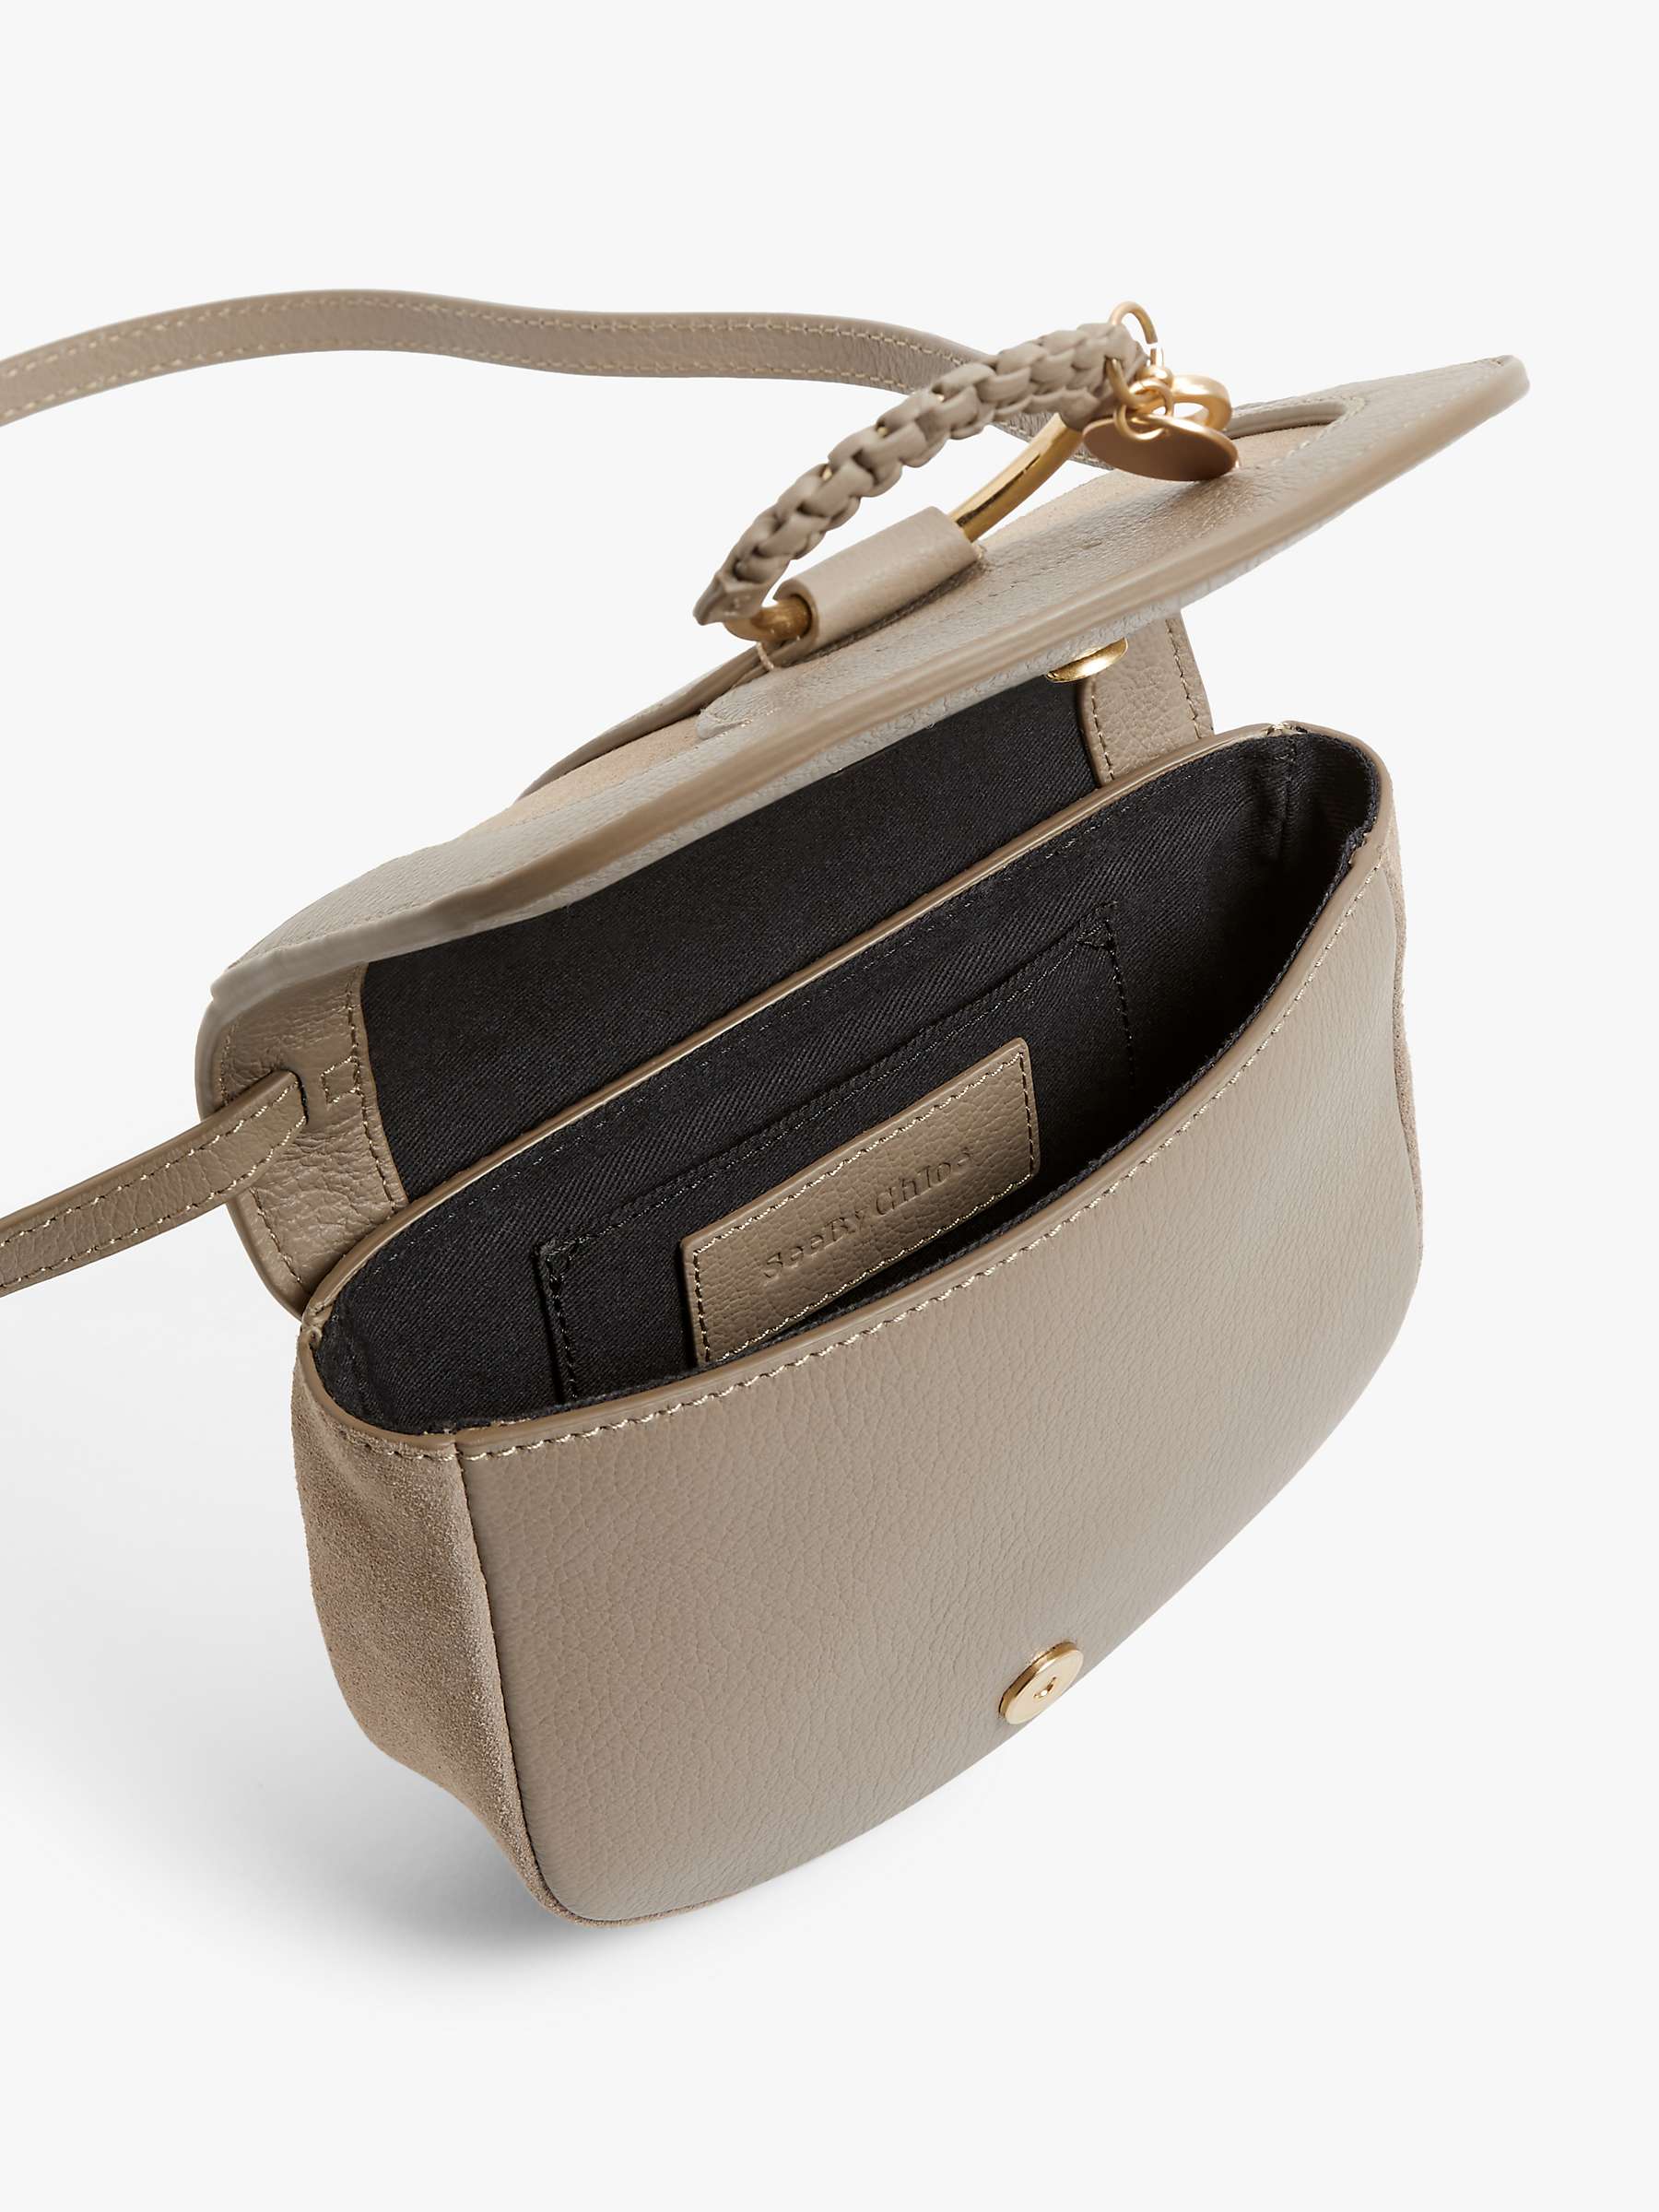 Buy See By Chloé Mini Hana Suede Leather Satchel Bag Online at johnlewis.com